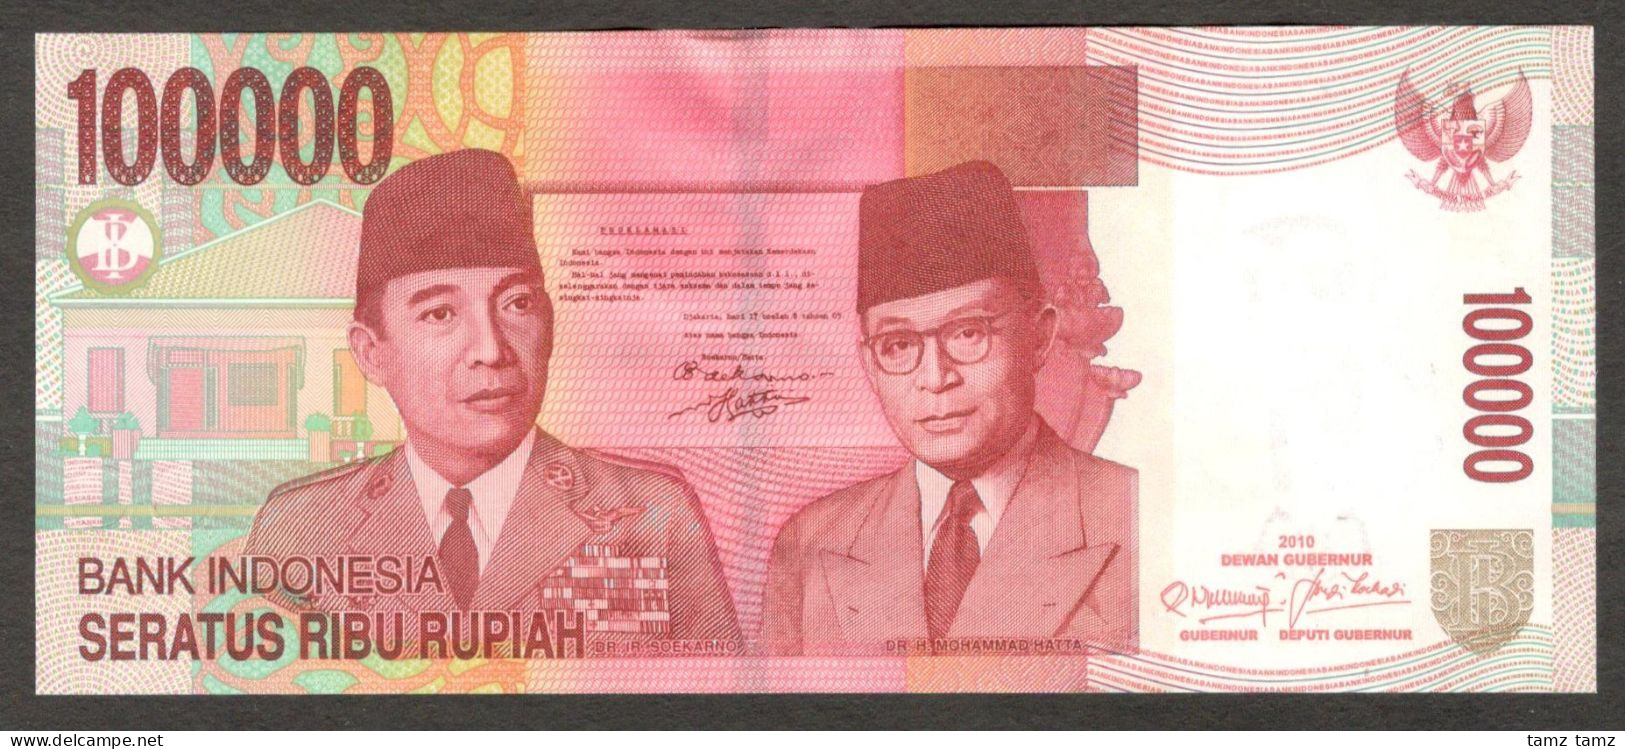 Indonesia 100000 100,000 Rupiah Replacement W/o Omron Rings P-146g* 2010/2004 UNC - Indonesien